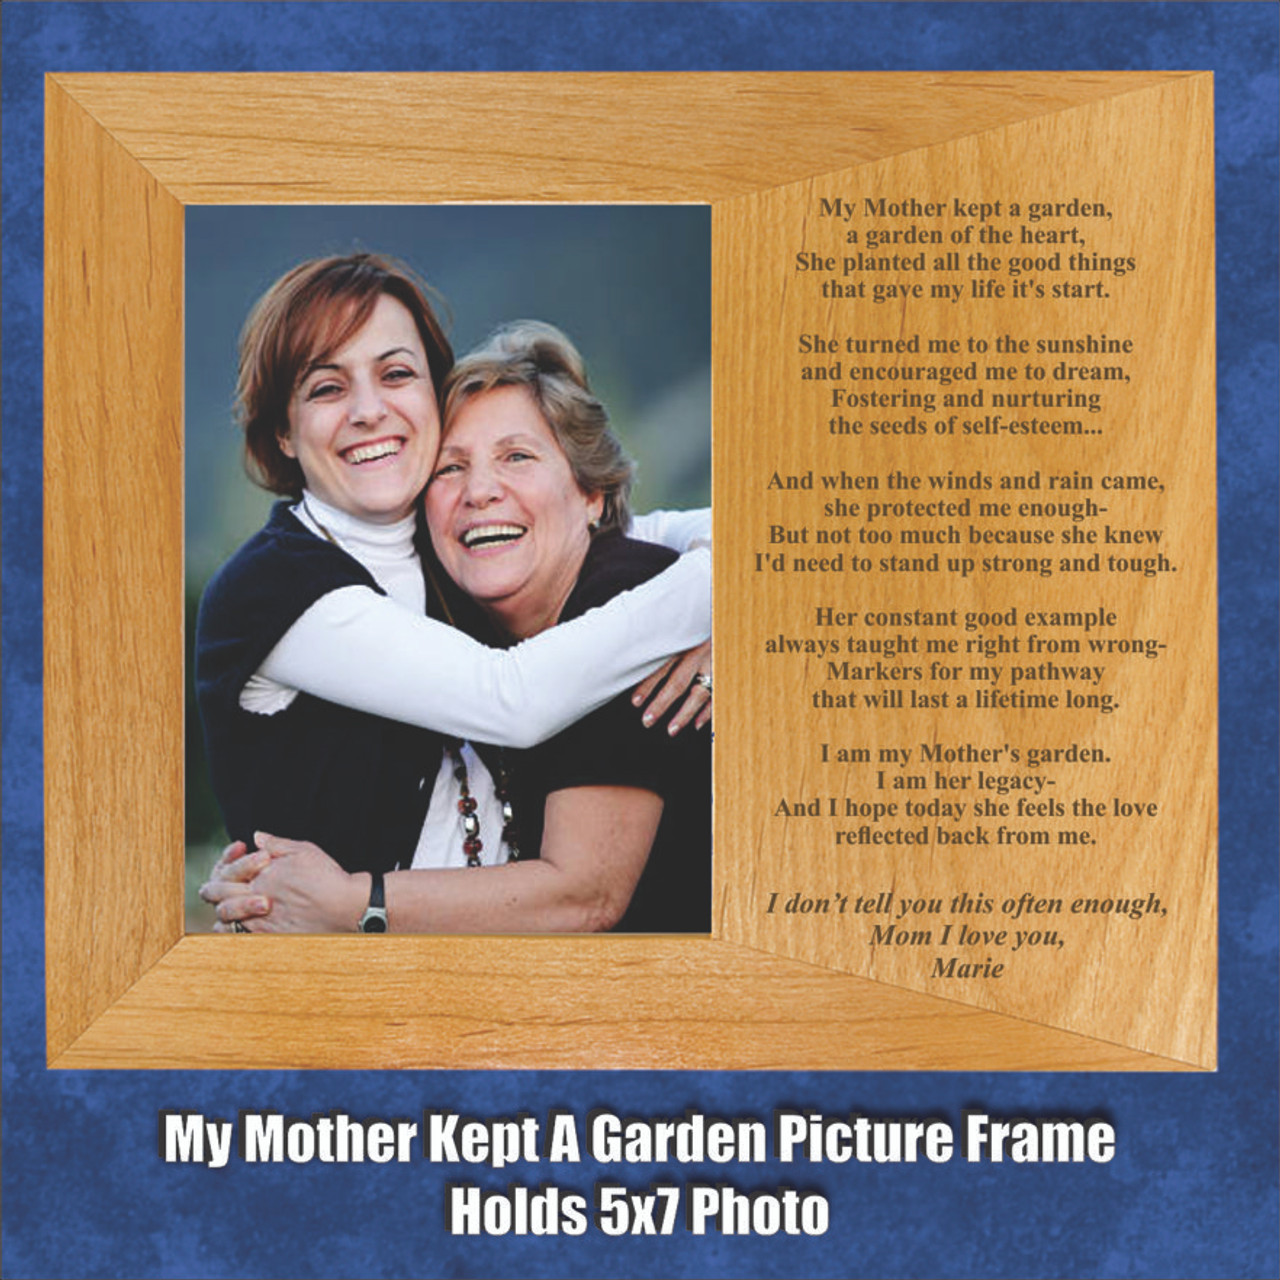 Personalized Love Photo frame